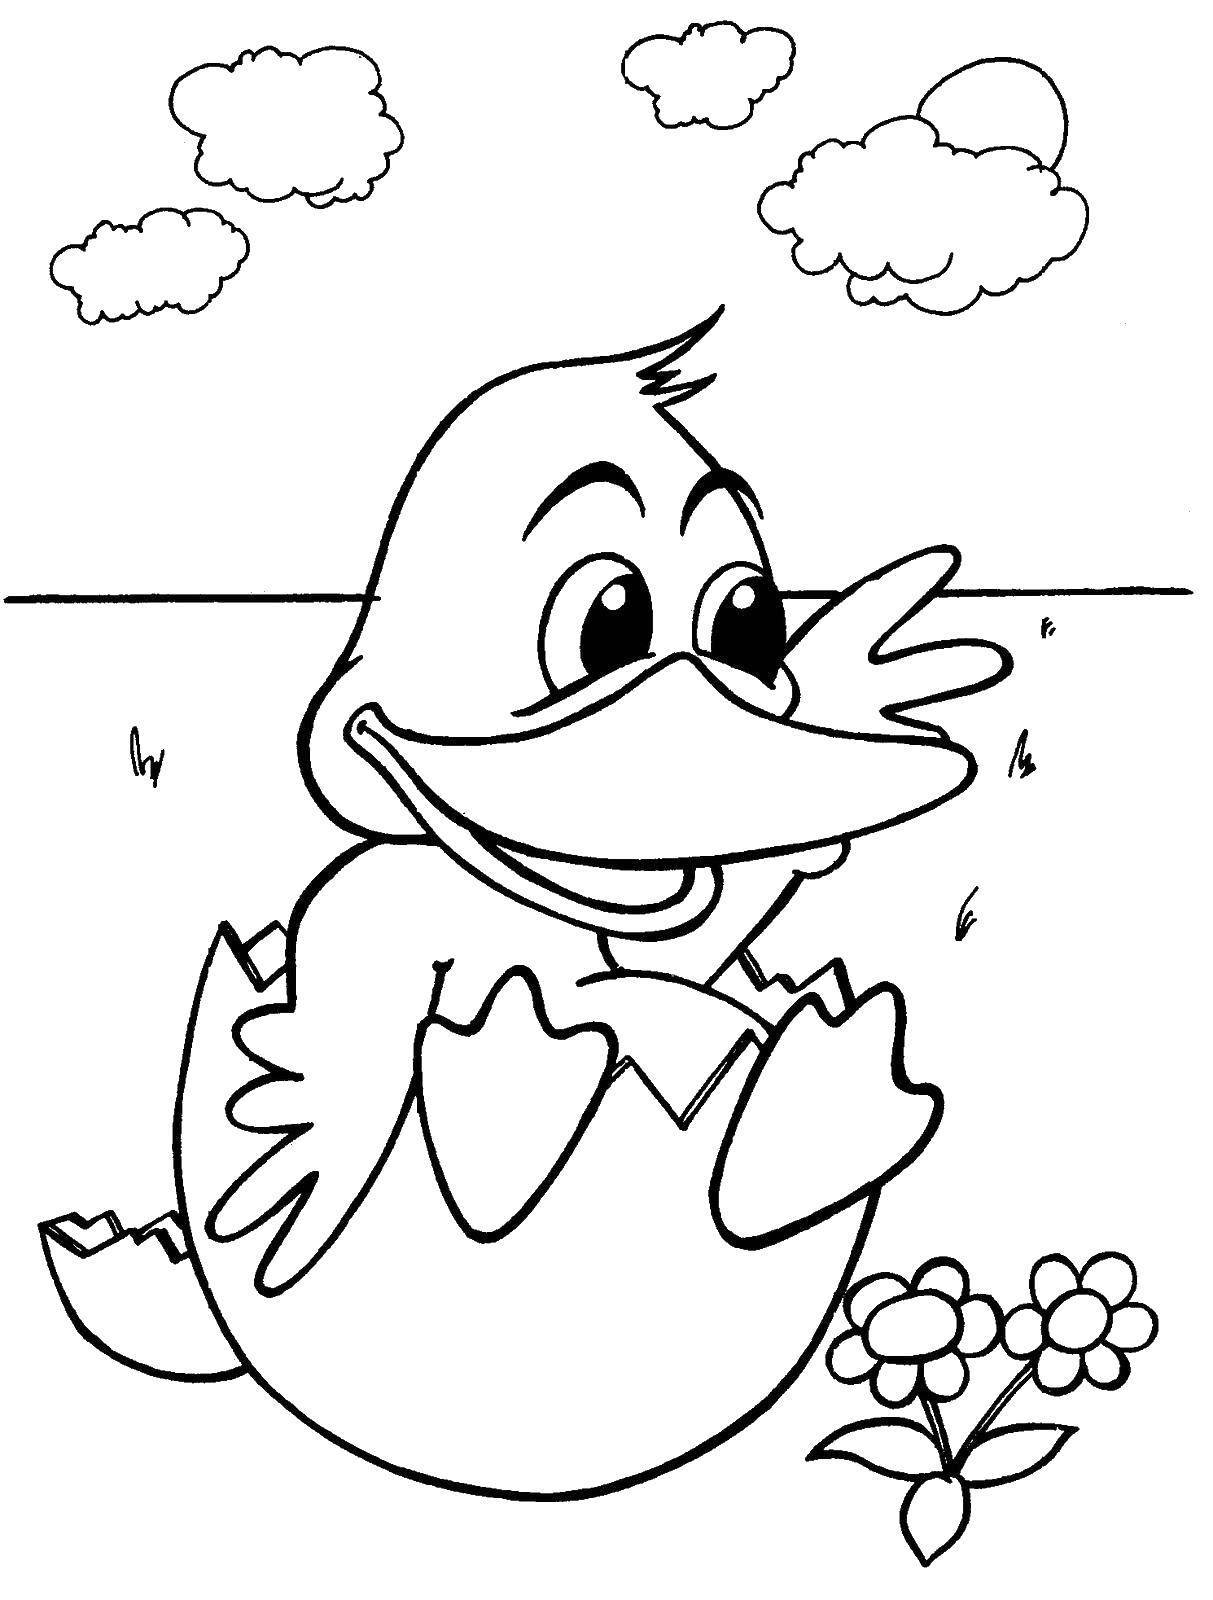 Coloring Duck. Category animals. Tags:  animals, duck, duckling.